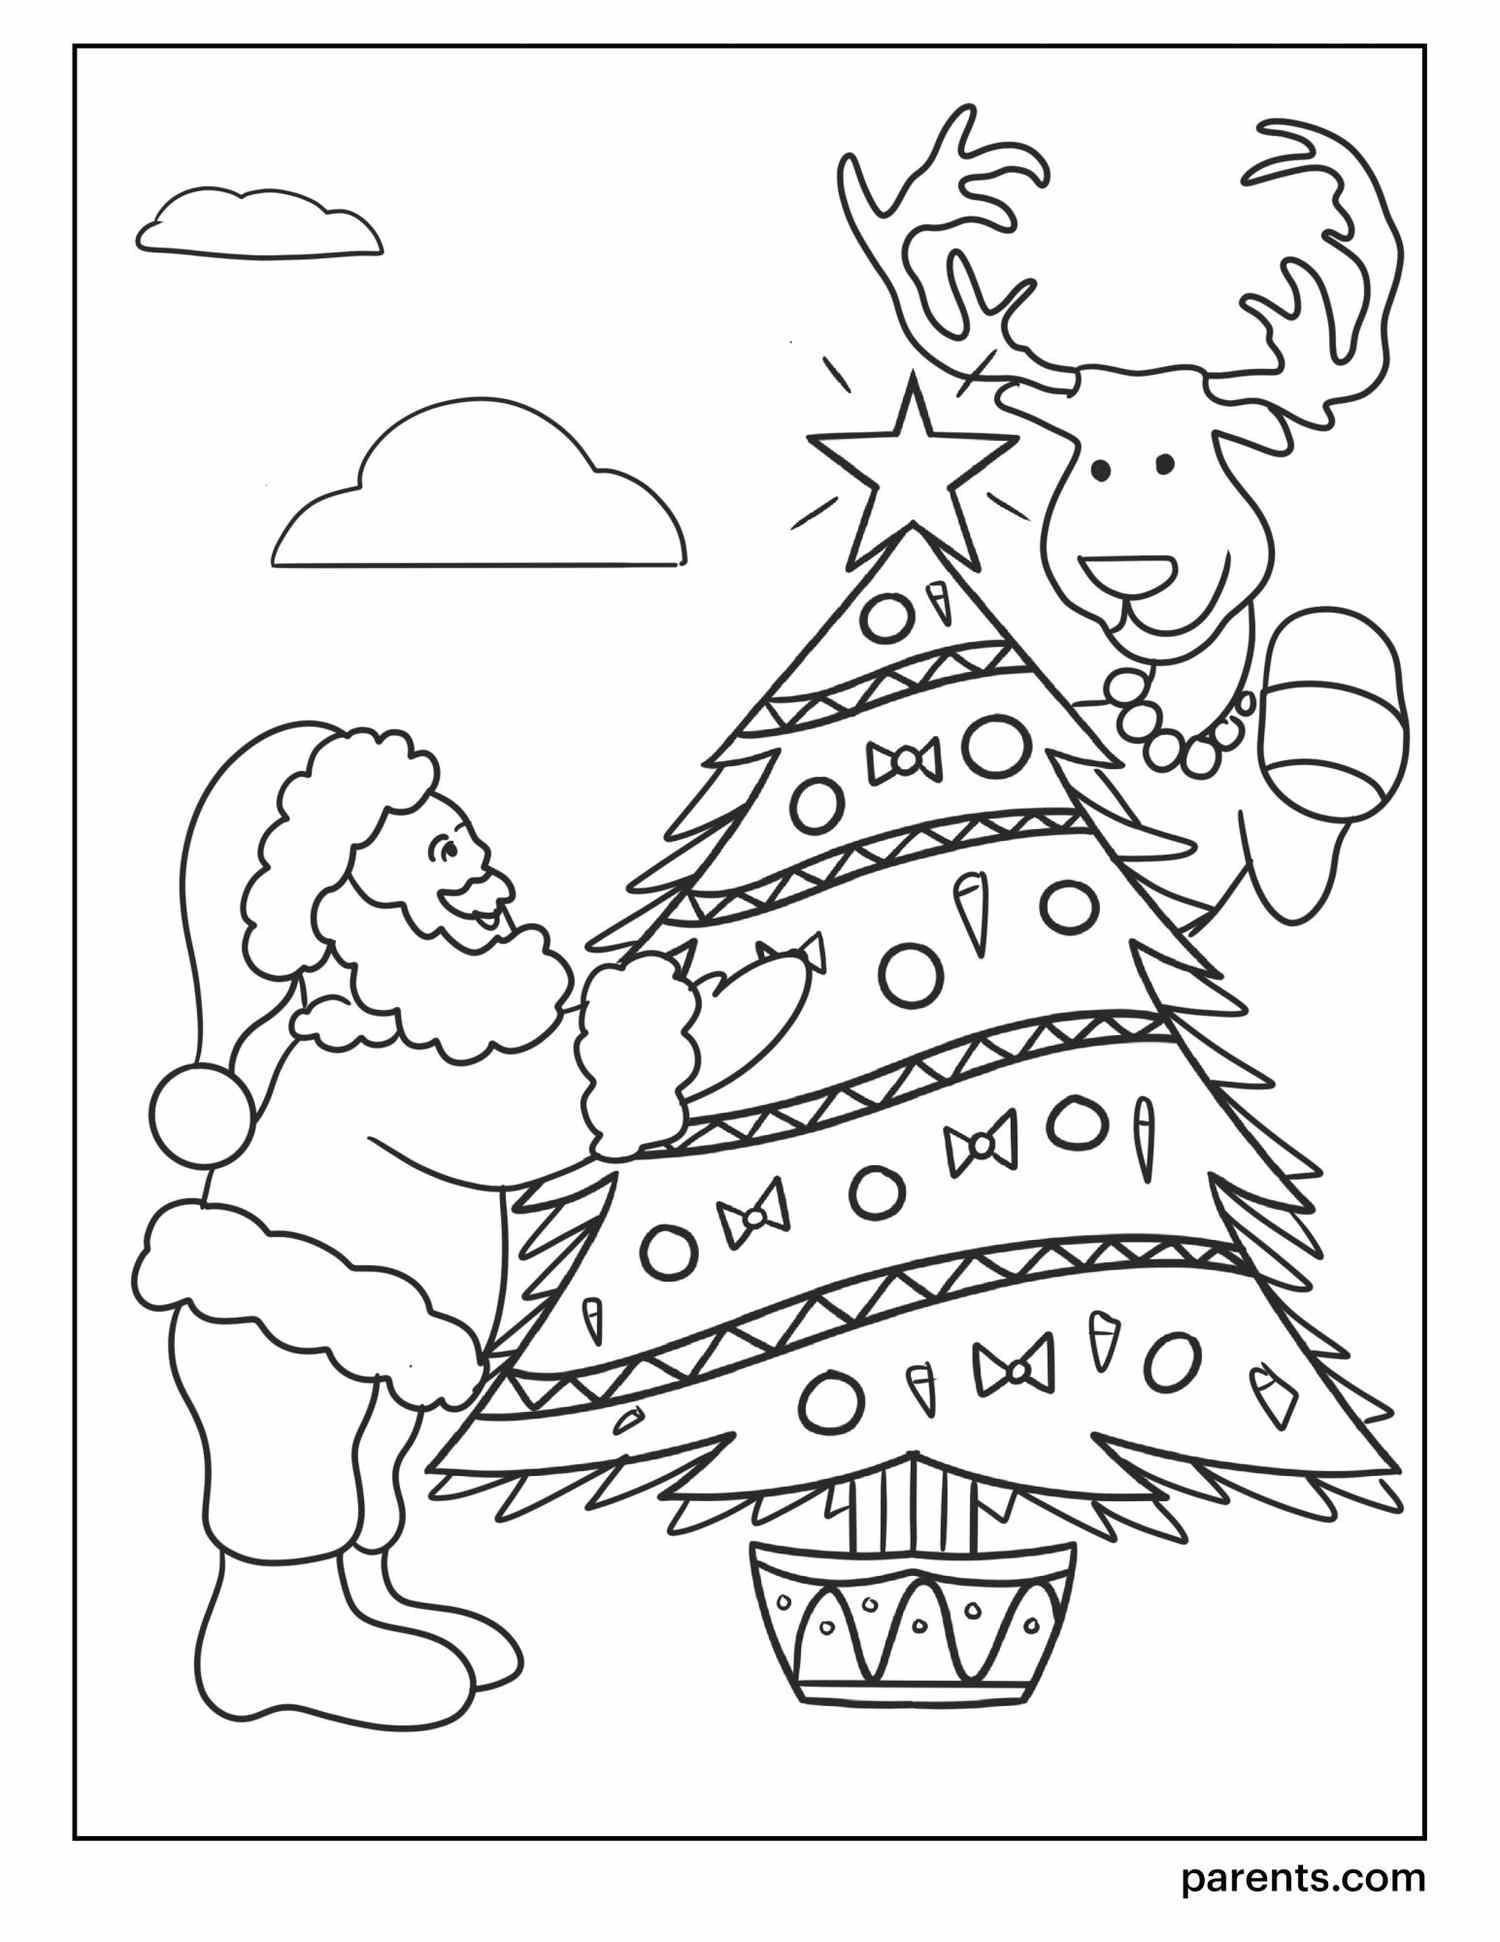 Coloring pages xmas tree